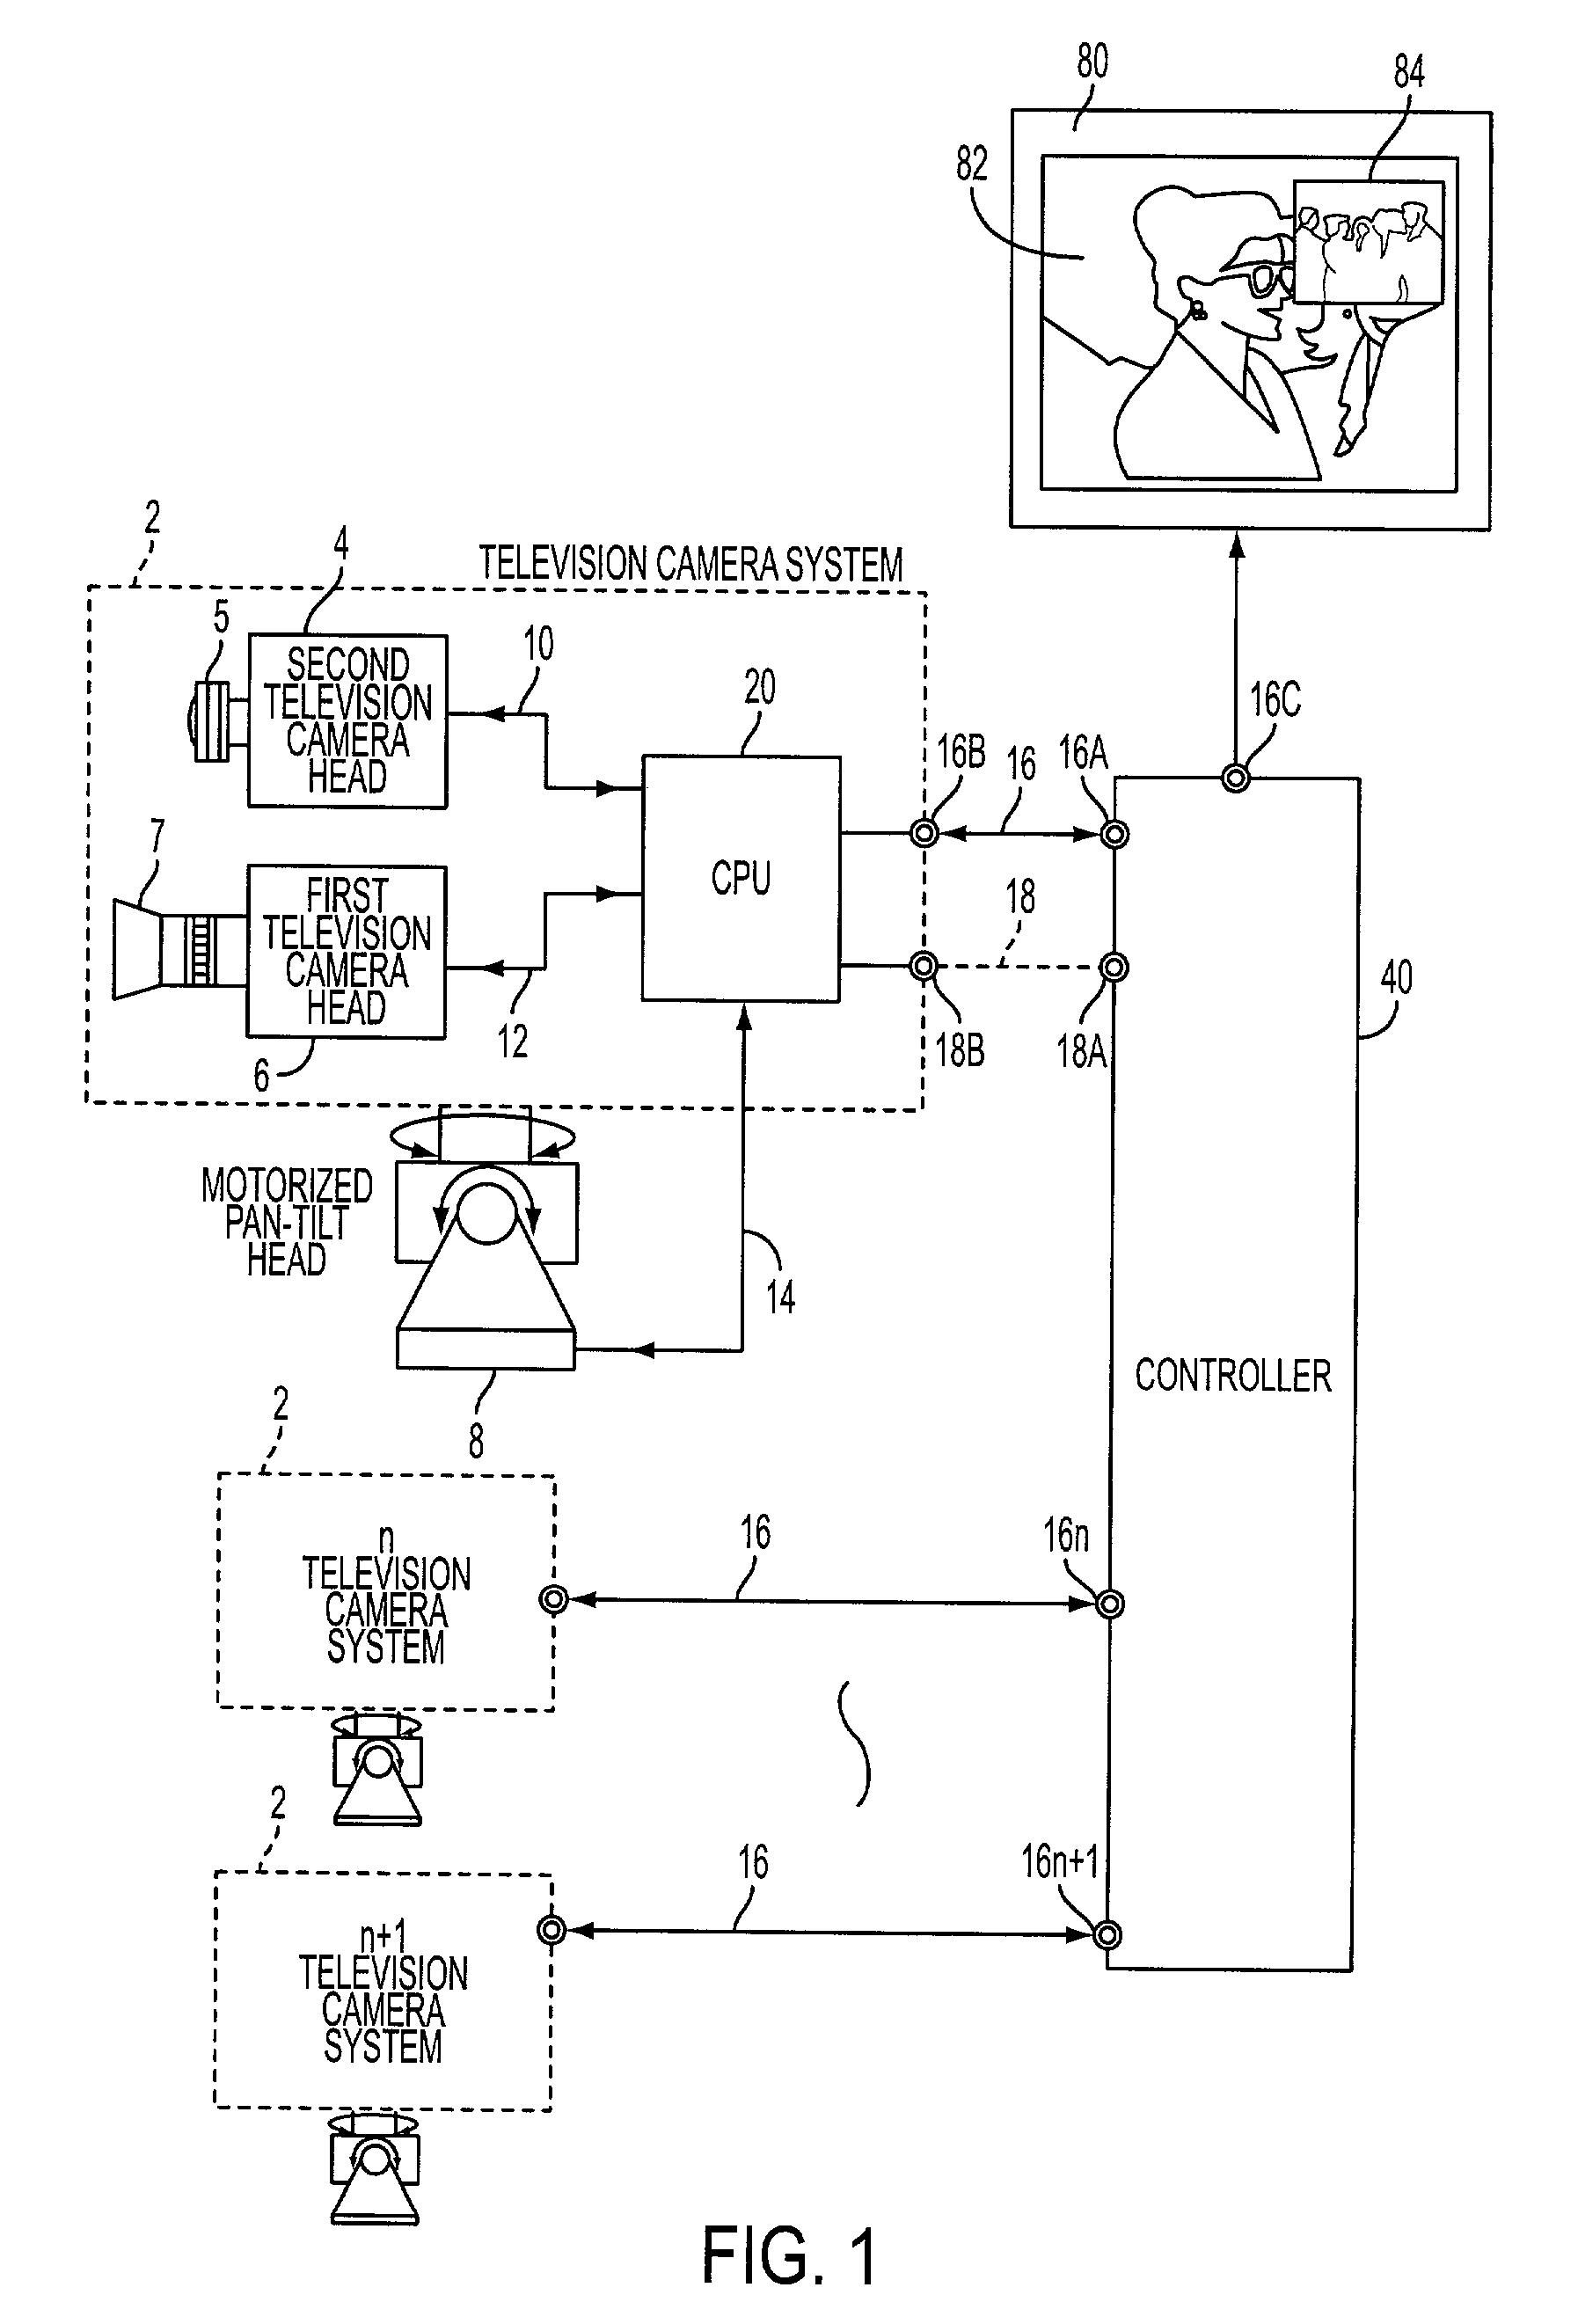 Apparatus for identifying the scene location viewed via remotely operated television camera